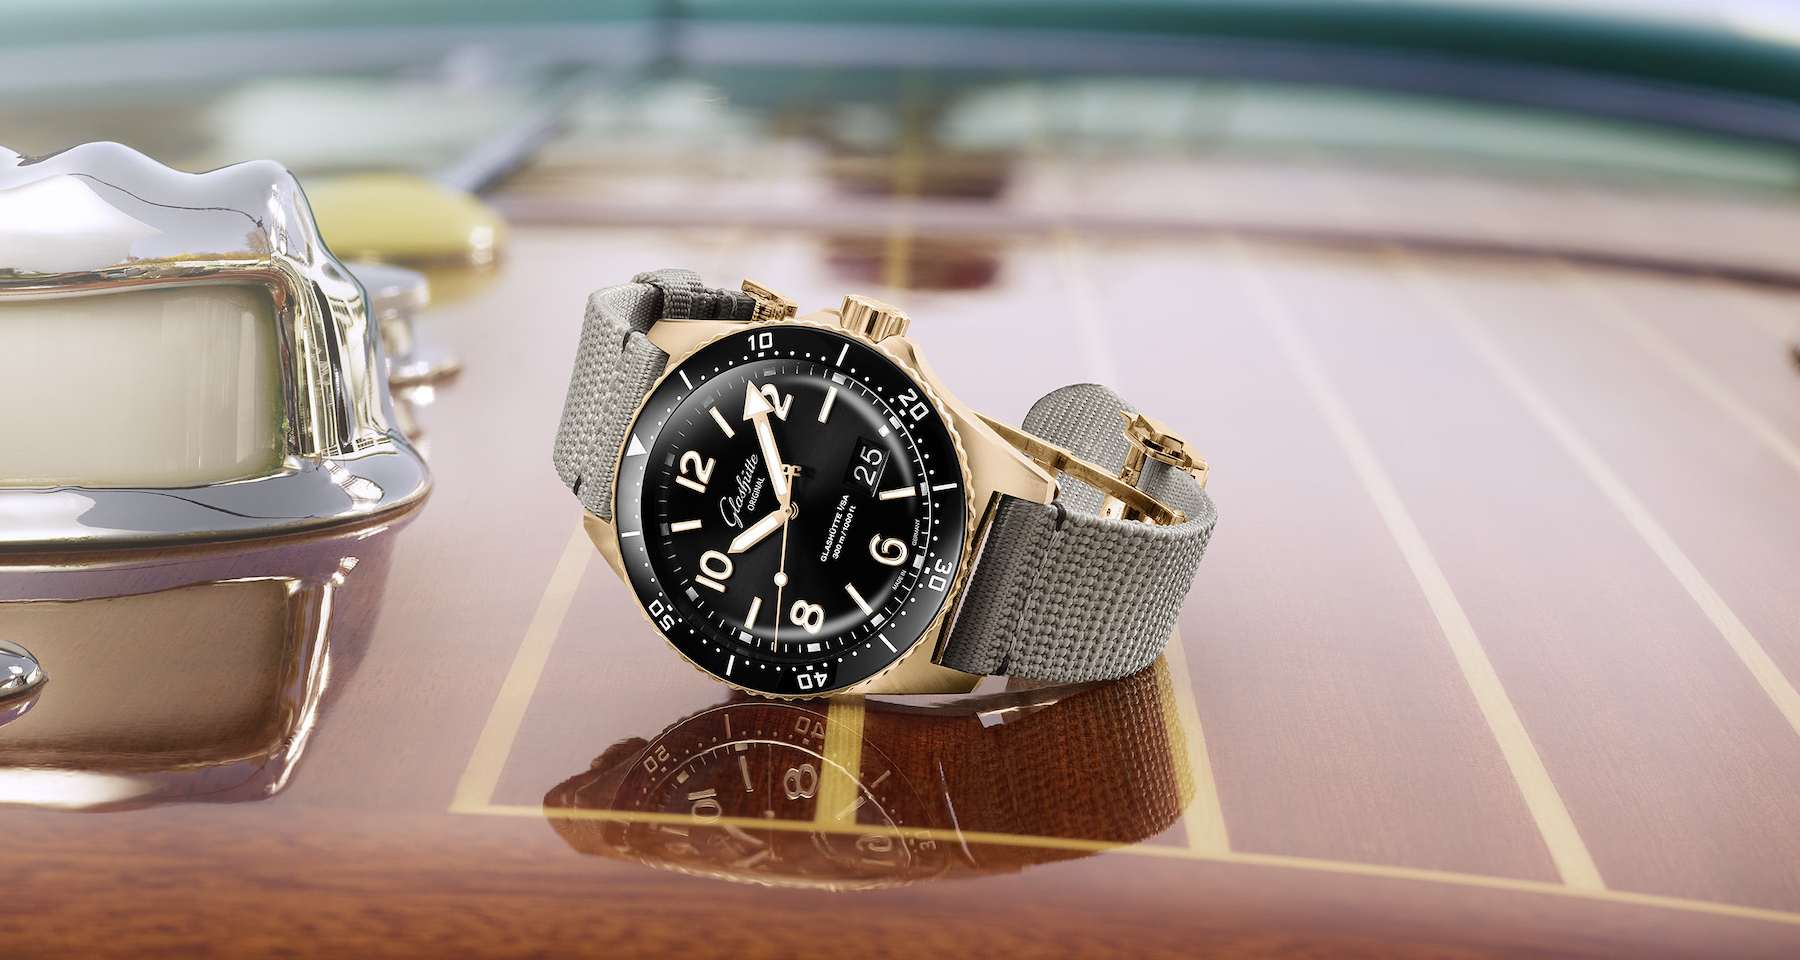 New high-end dive watches from Glashütte Original: SeaQ Panorama Date Gold